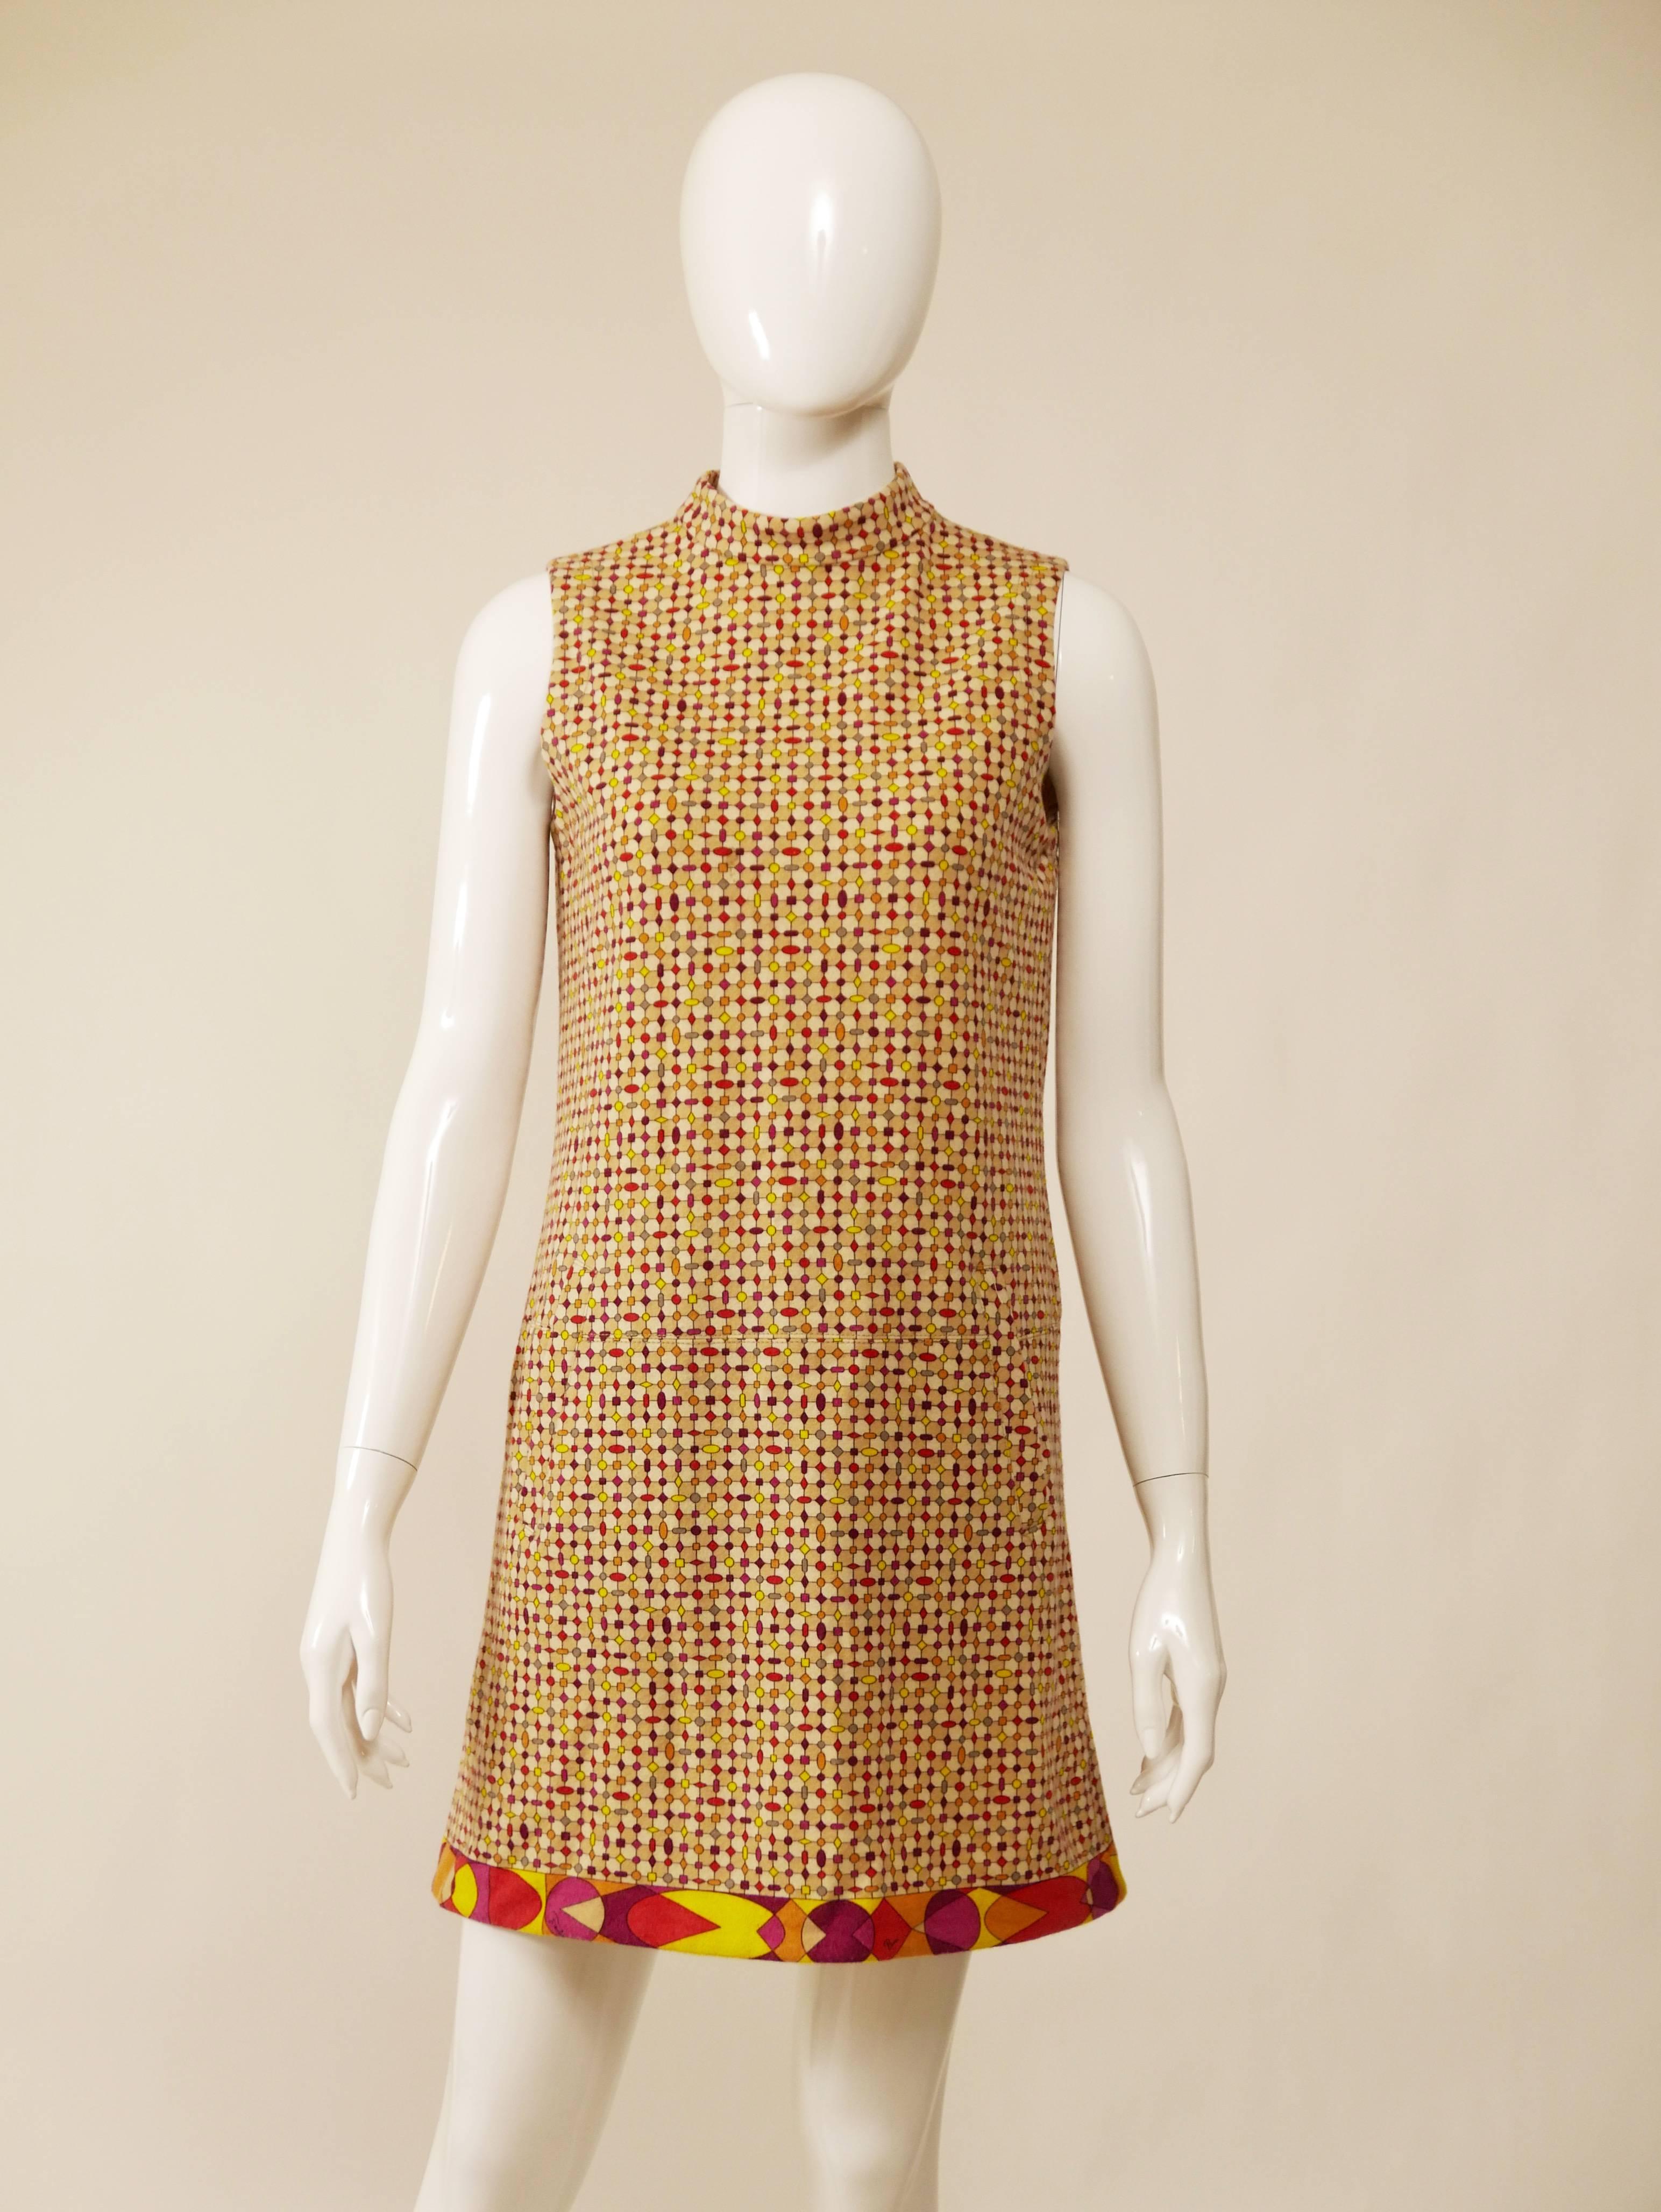 This lovely Emilio Pucci dress is made of wooden soft stretch fabric with exotic and colorful Pucci style print. It has back zip closure and hidden pockets.

Very good condition

Label: Emilio Pucci
Fabric: wool
Color: cream/red/magenta/beige/yellow